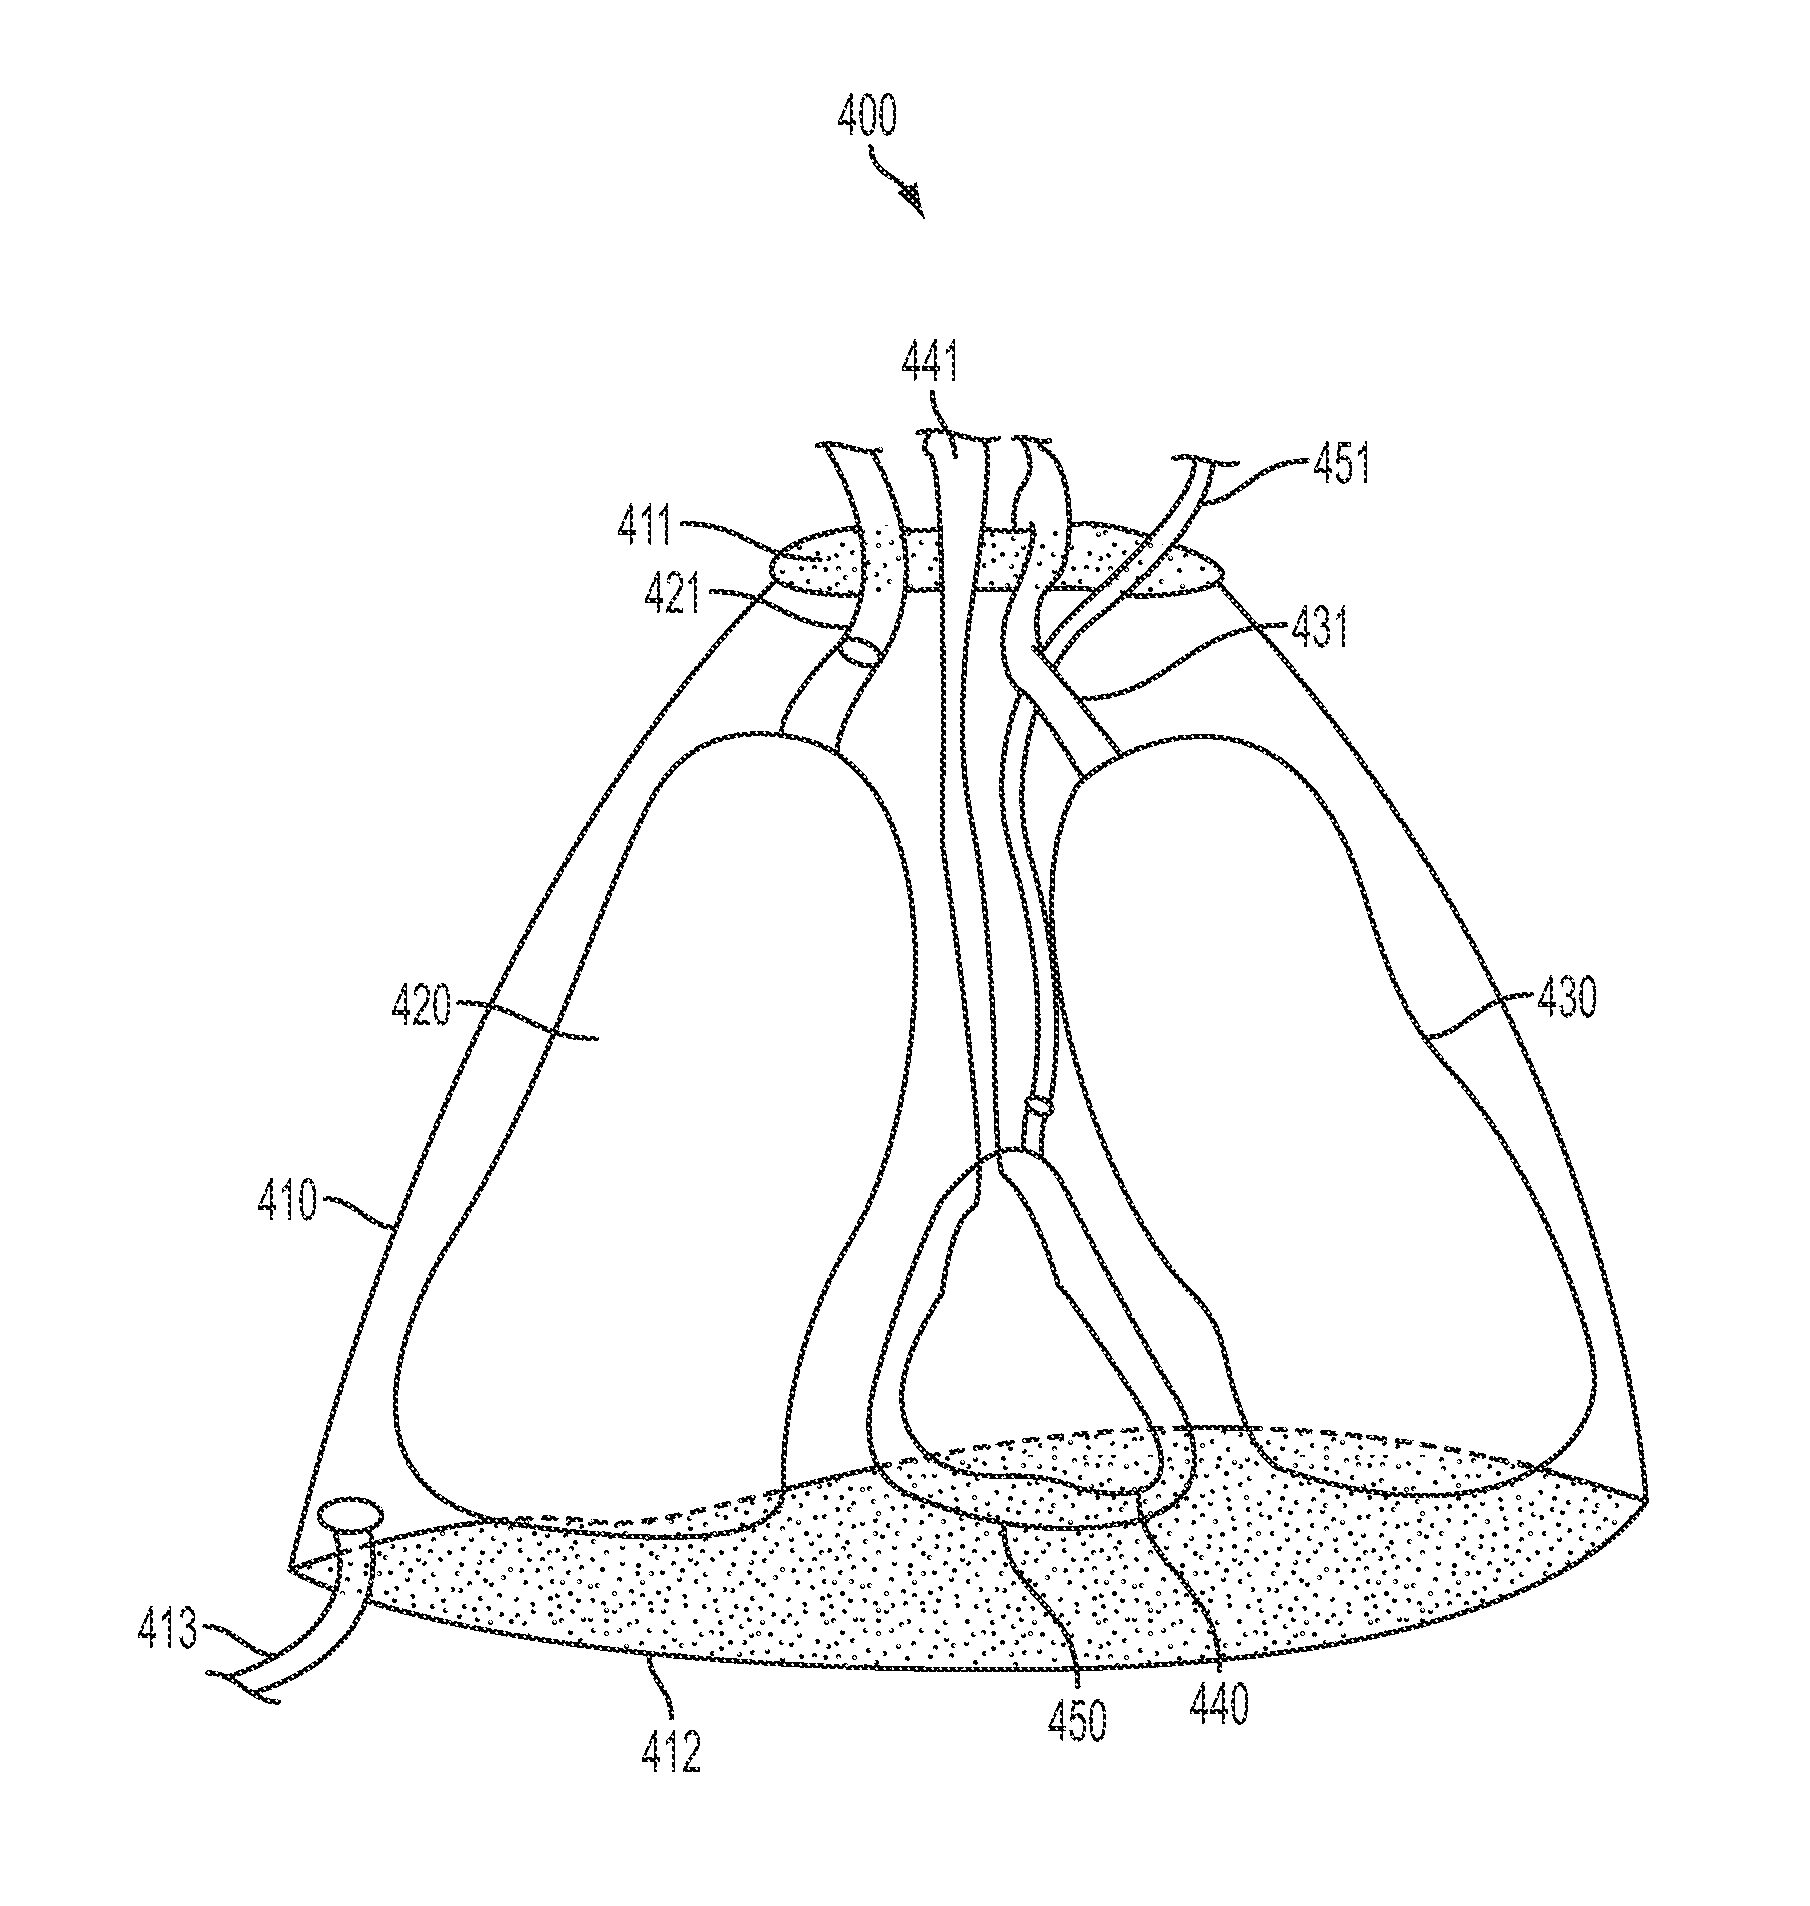 System, method, and computer program product for simulating epicardial electrophysiology procedures